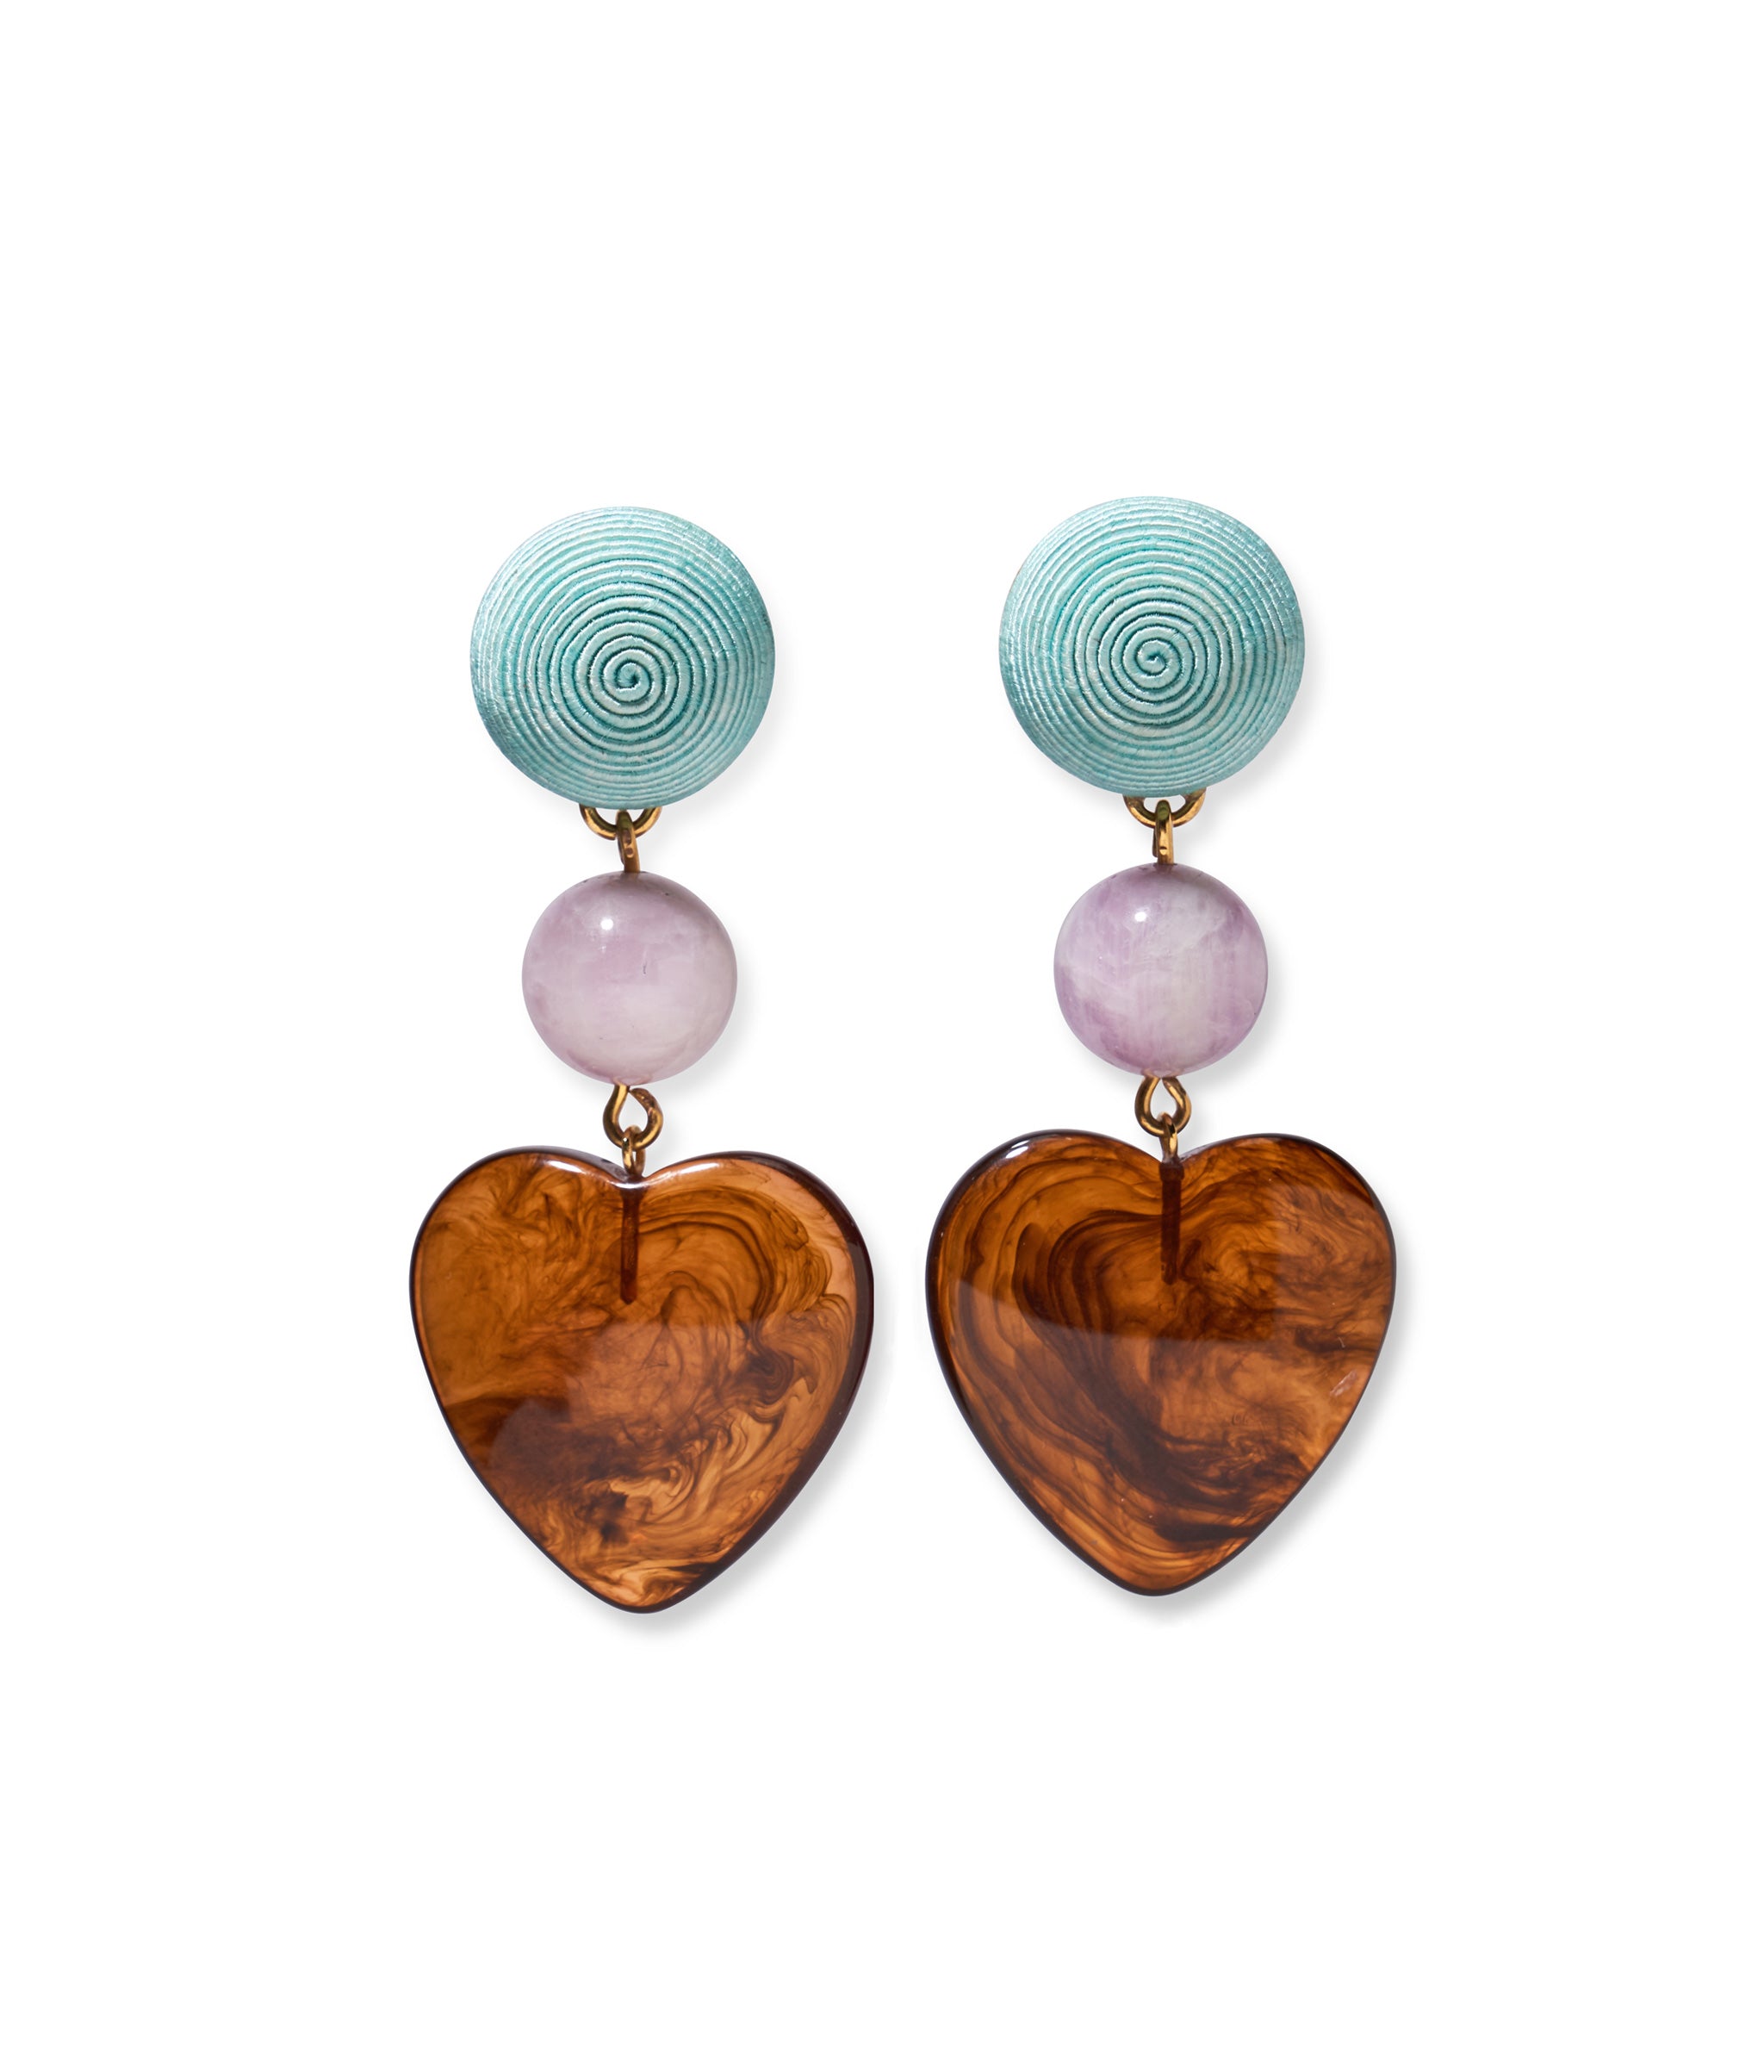 Long Weekend Earrings. In gold with woven aqua silk cord tops, kunzite rounds, and hanging tortoise resin hearts. 